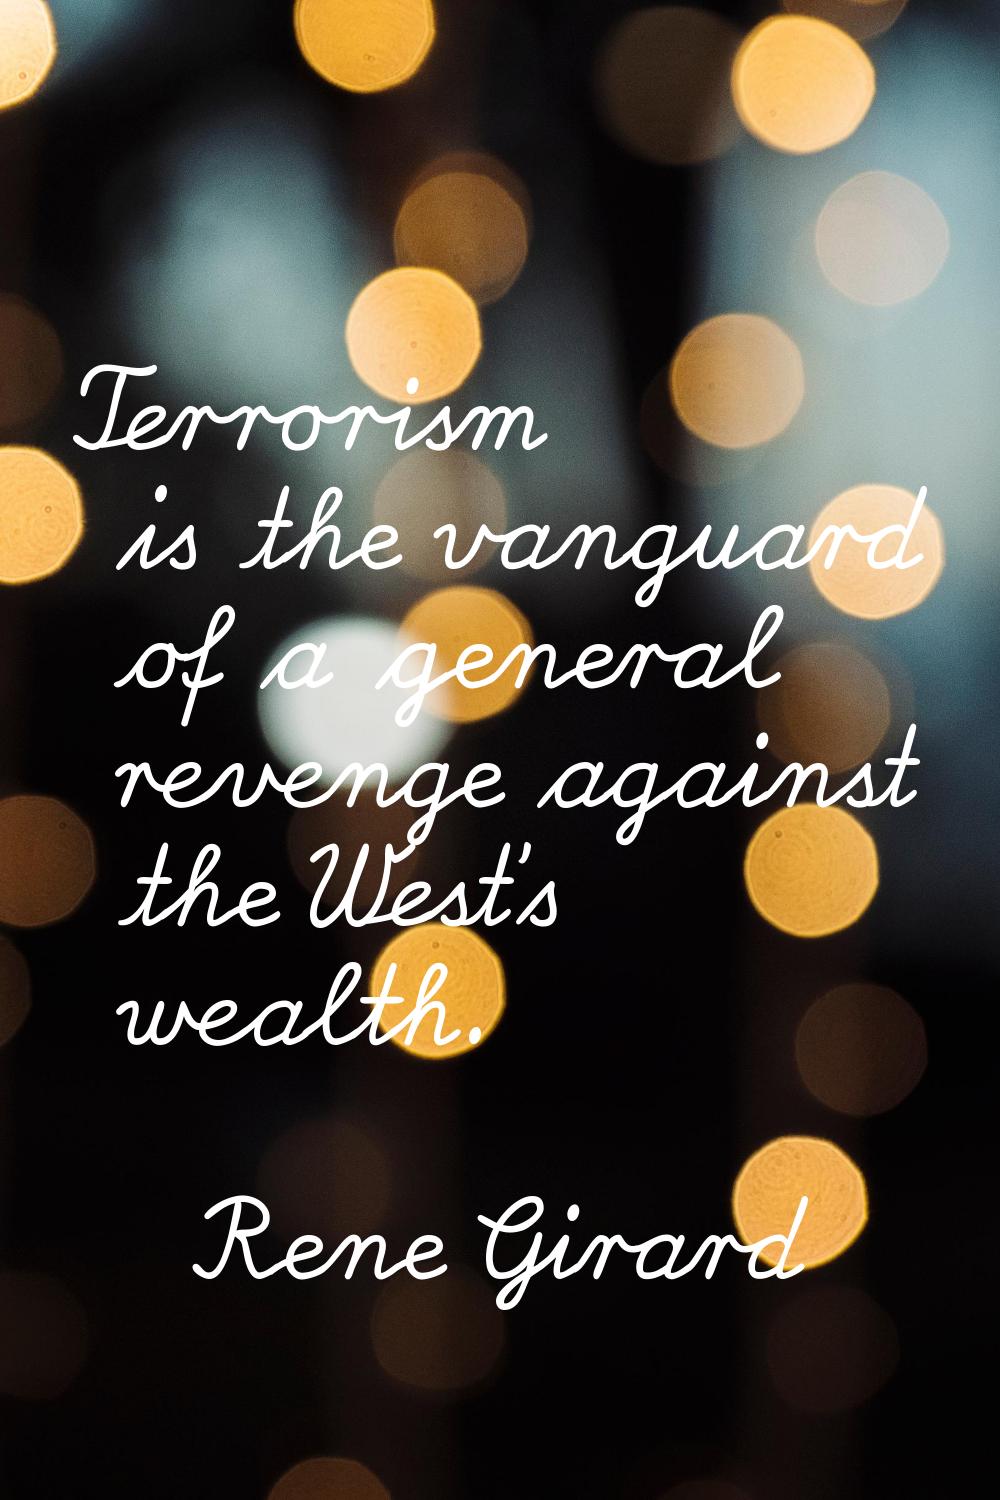 Terrorism is the vanguard of a general revenge against the West's wealth.